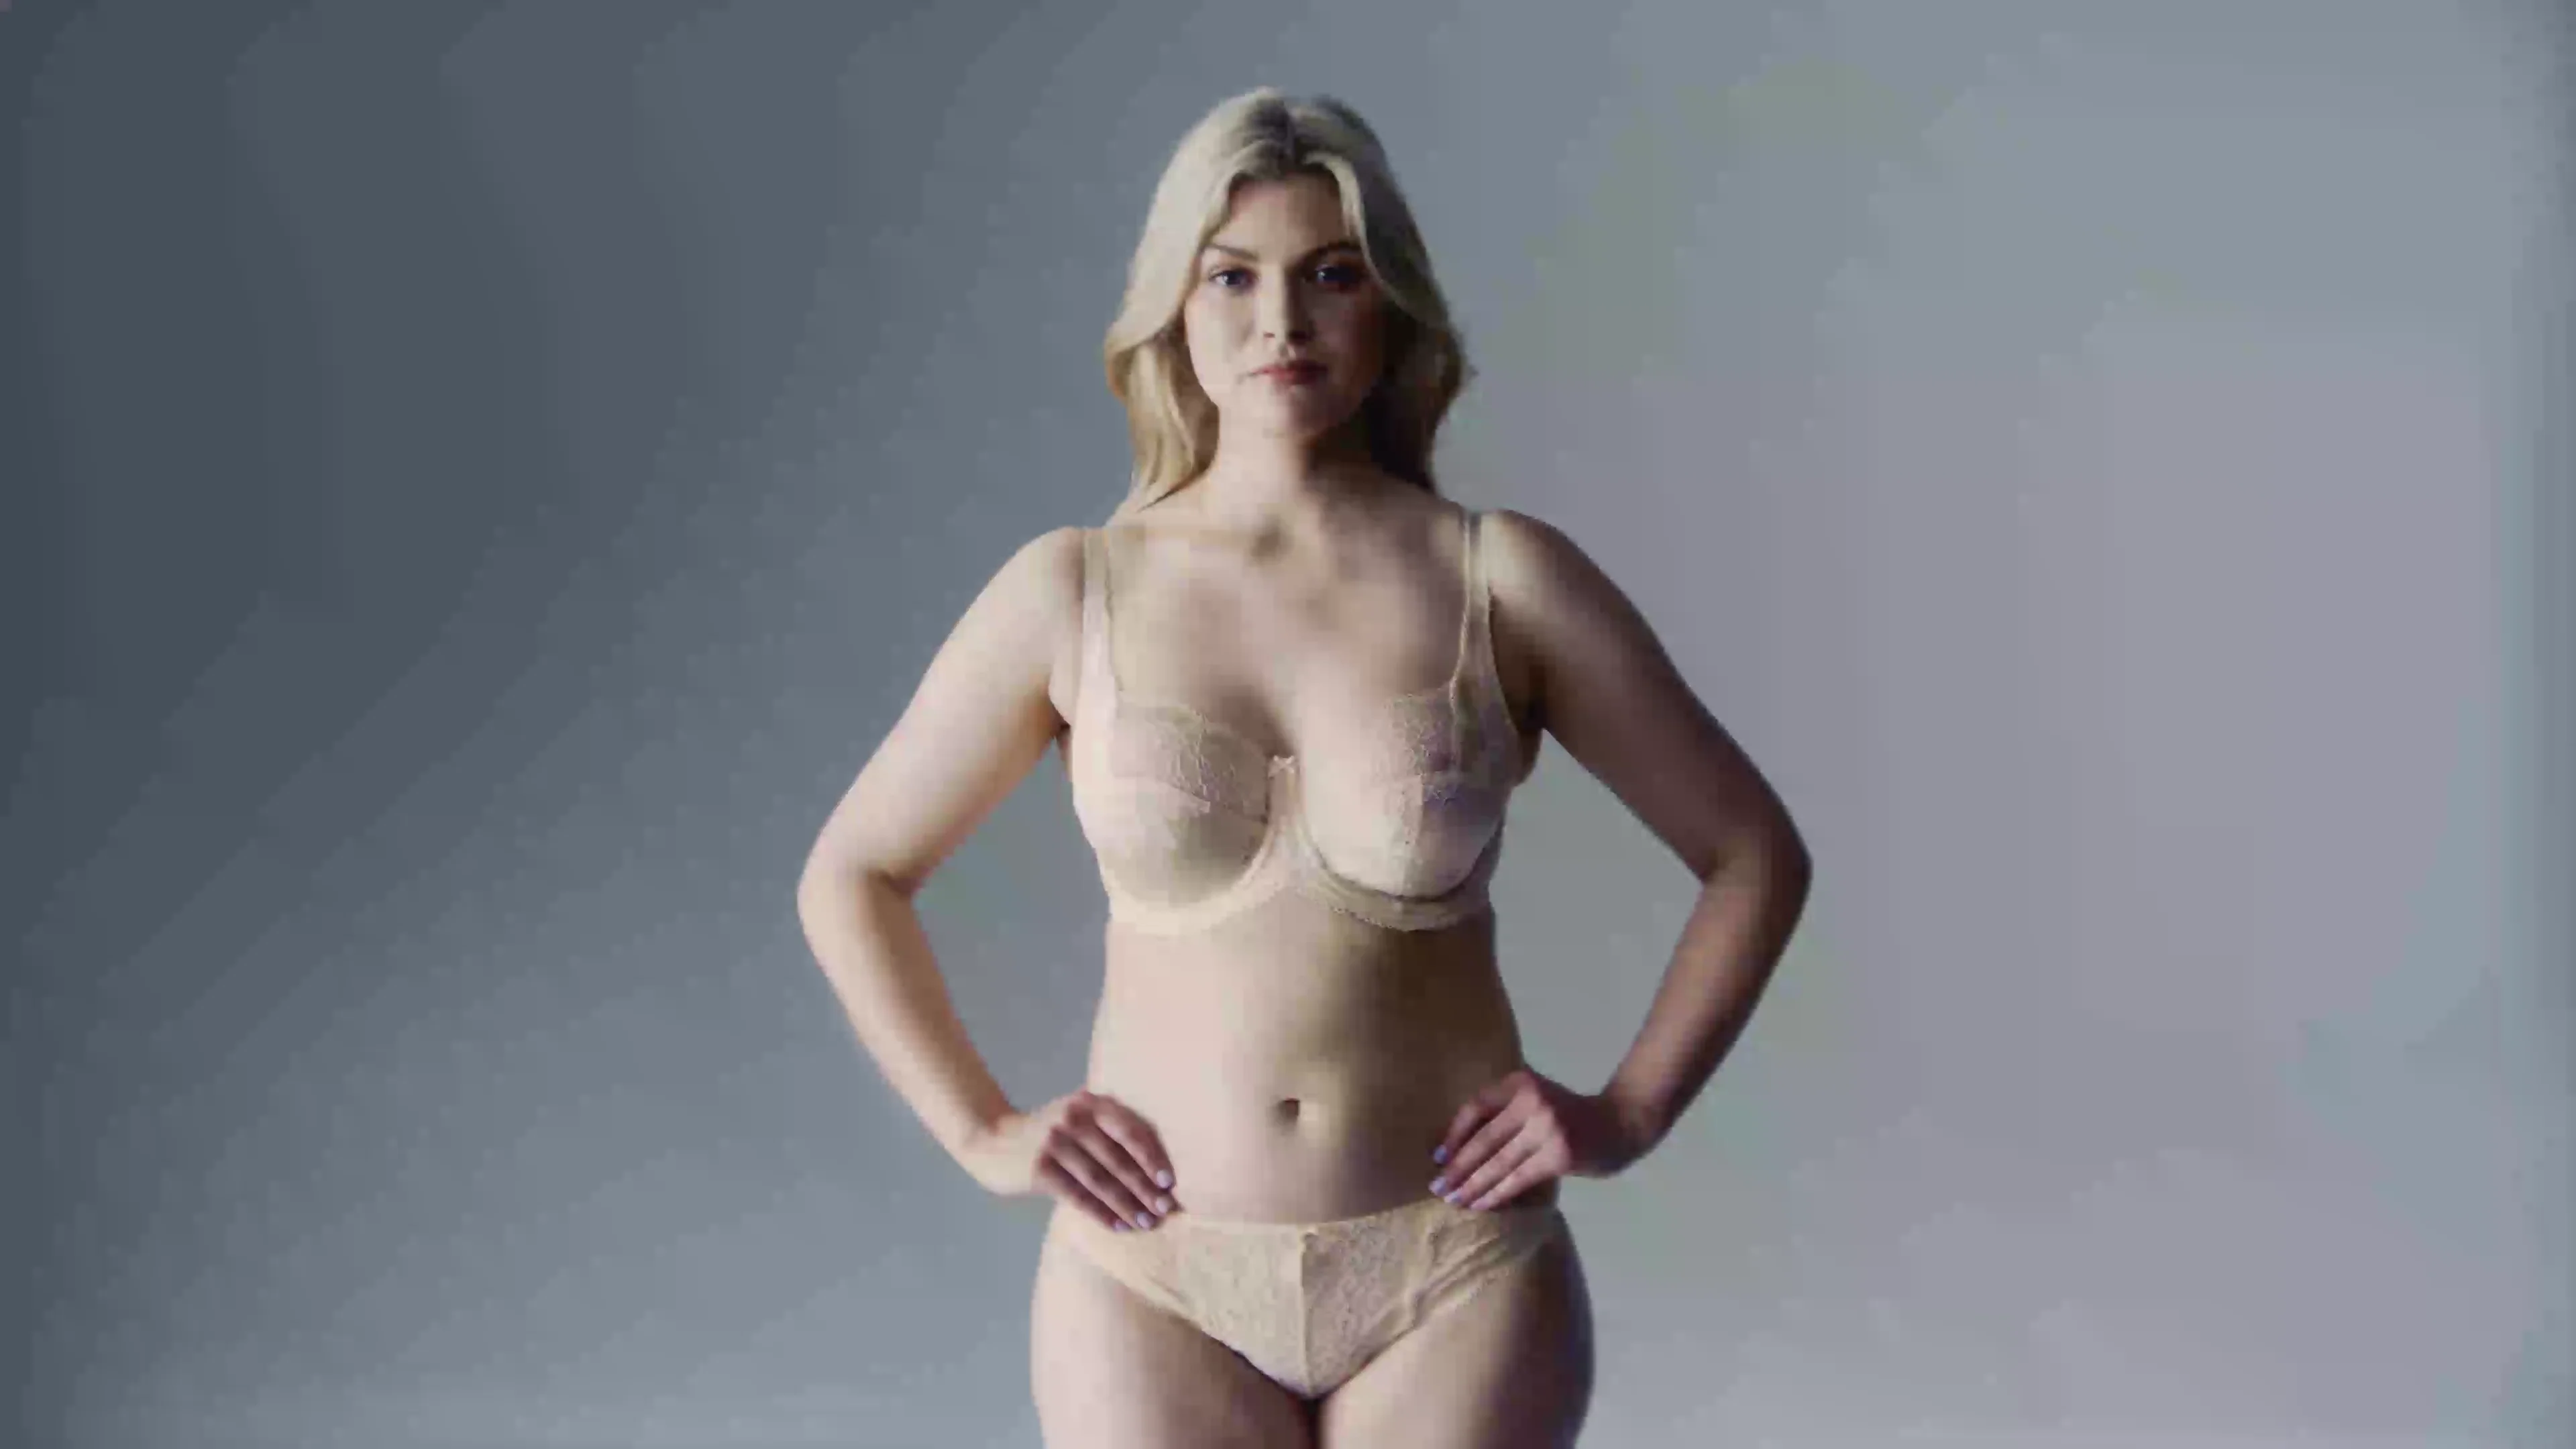 Shapeez Bras - How to Measure Your CUP Size on Vimeo